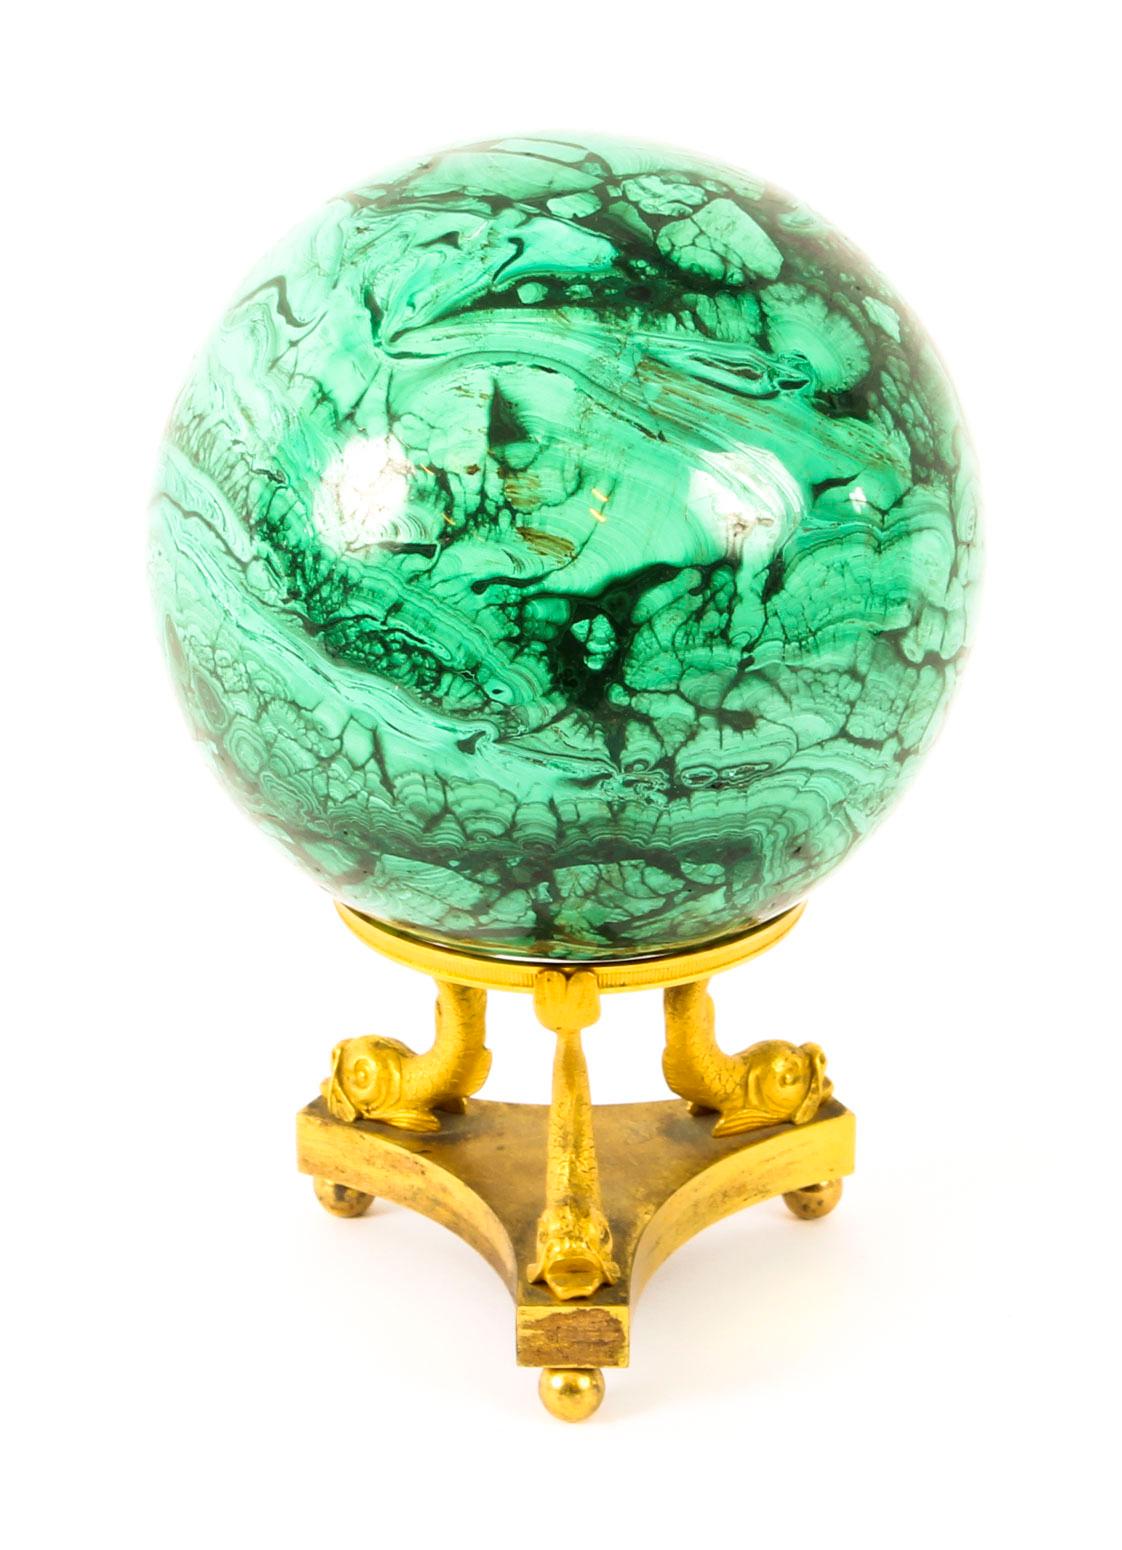 This is a superb large malachite sphere with a decorative ormolu support, circa 1860 in date.

This beautiful malachite sphere features the distinctive textured pattern of the green polished stone.

It stands on a superb ormolu openwork support